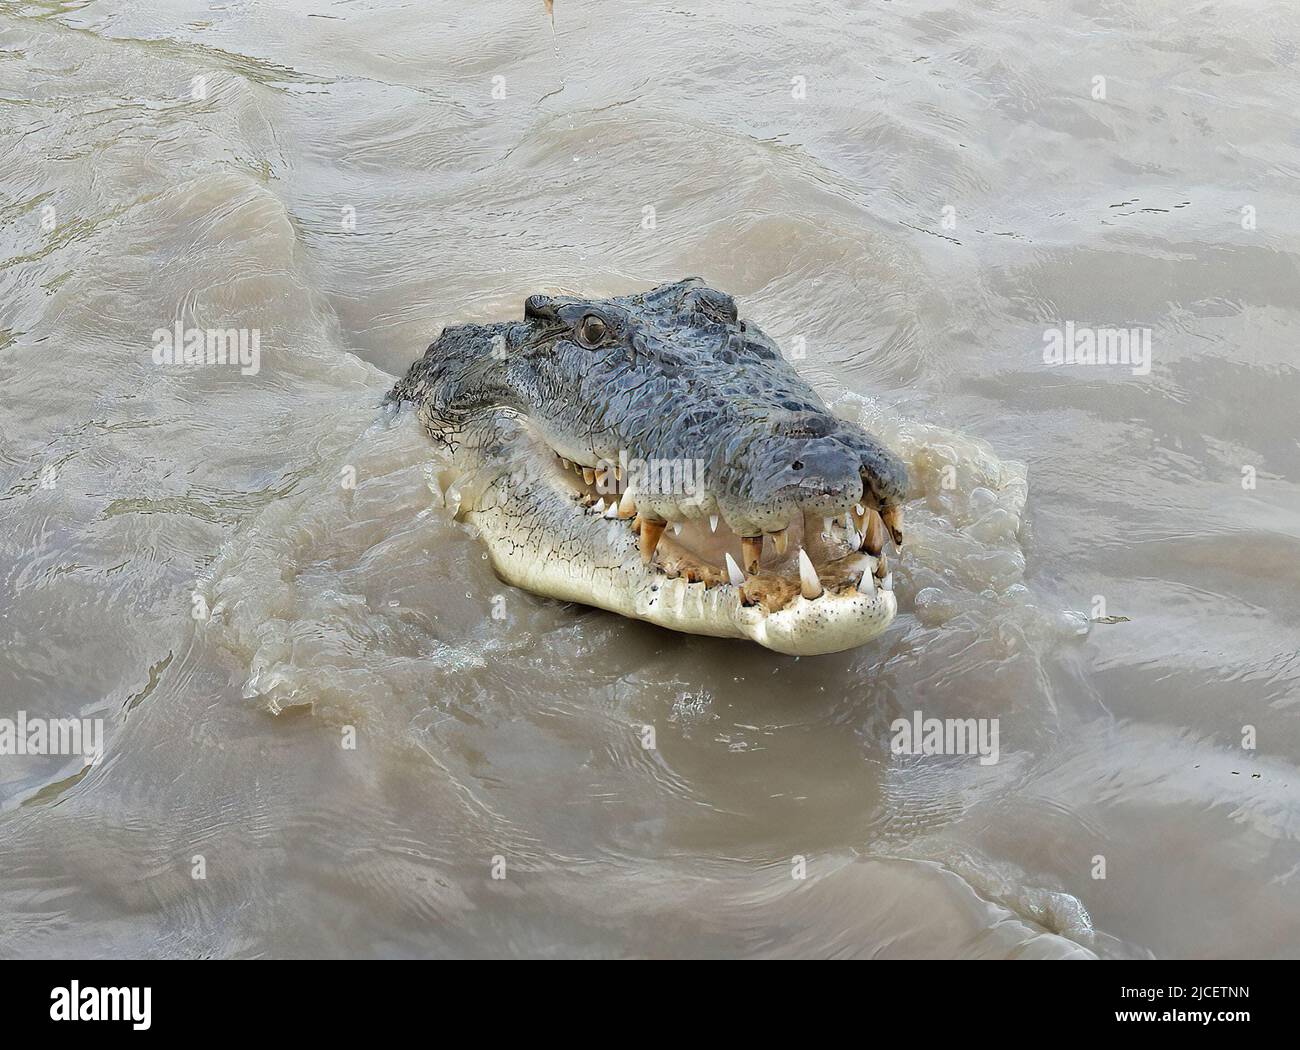 Headshot of a Saltwater Crocodile (Crocodylus porosus) with open mouth and showing teeth in the Adelaide River, Northern Territory, NT, Australia Stock Photo